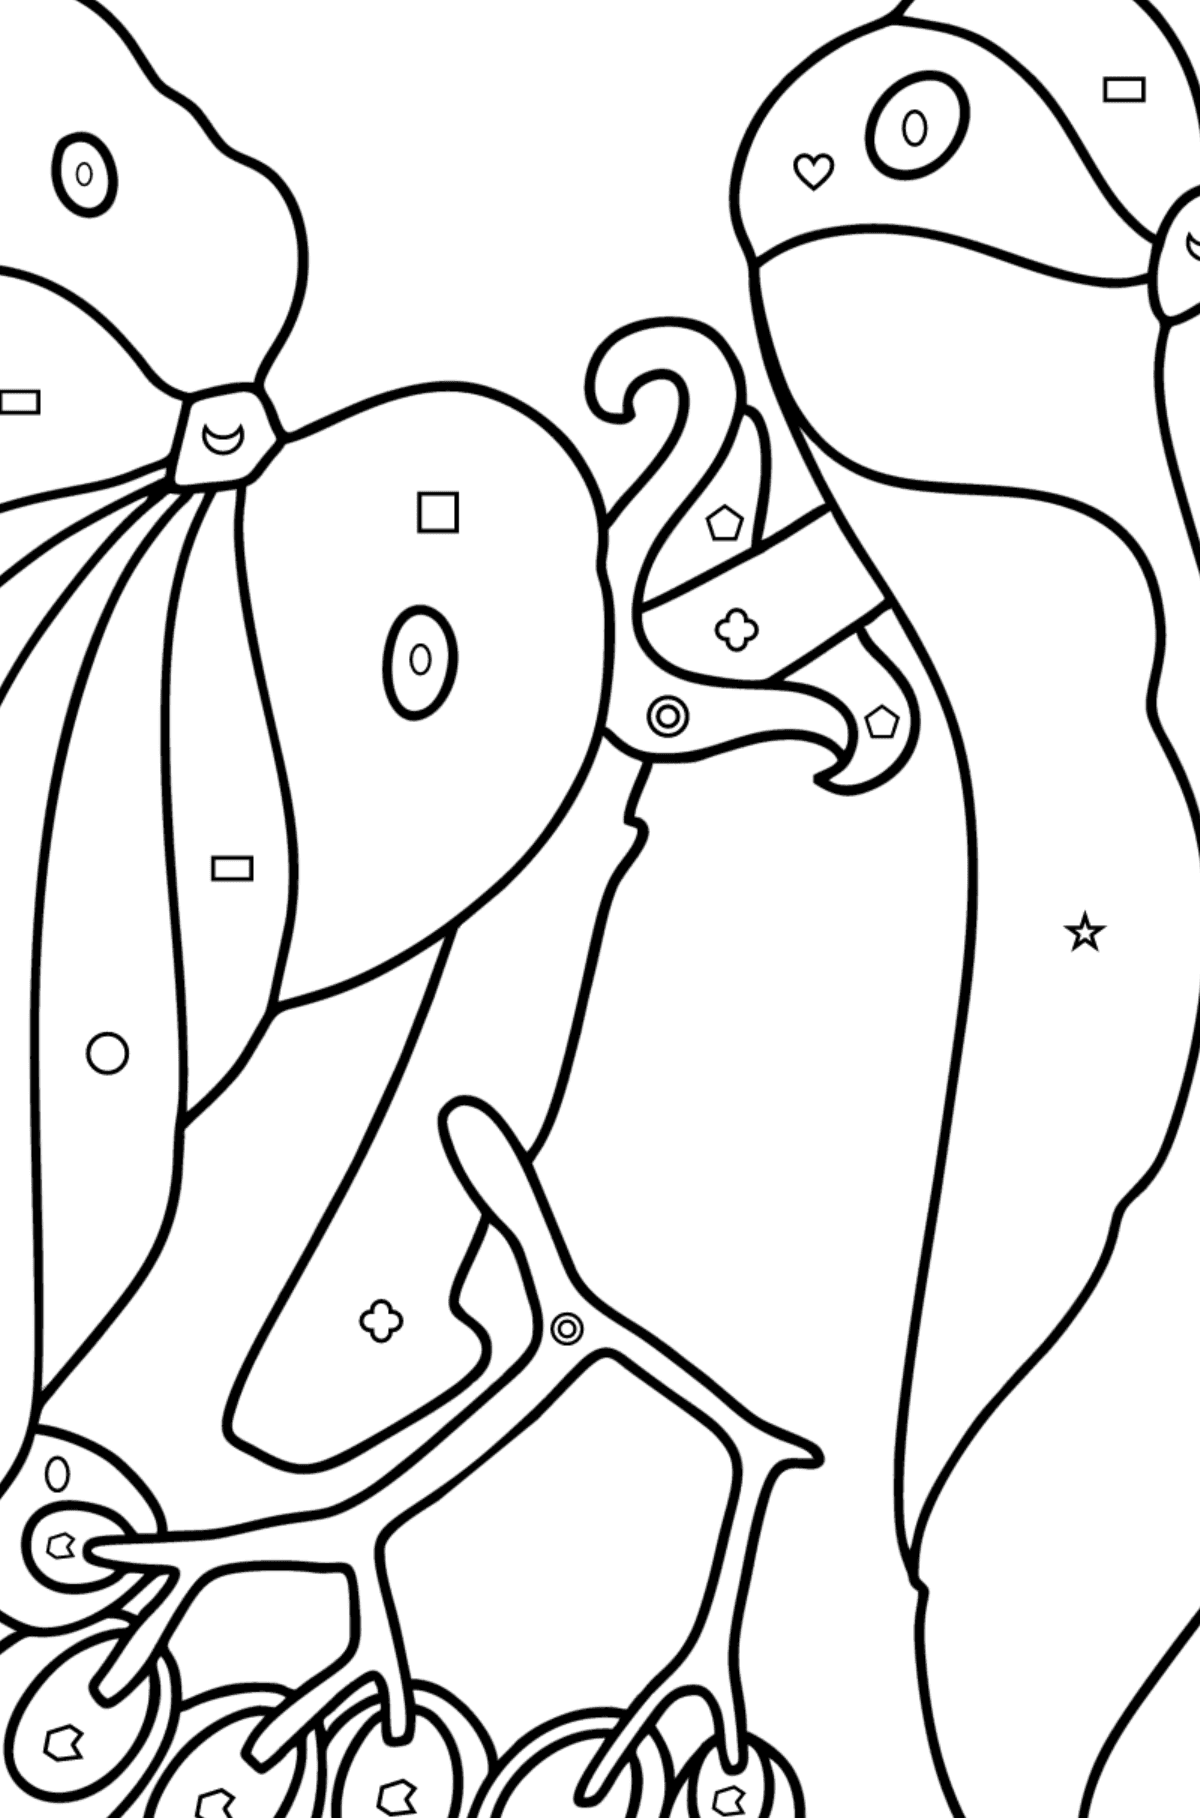 Begonia coloring page - Coloring by Geometric Shapes for Kids